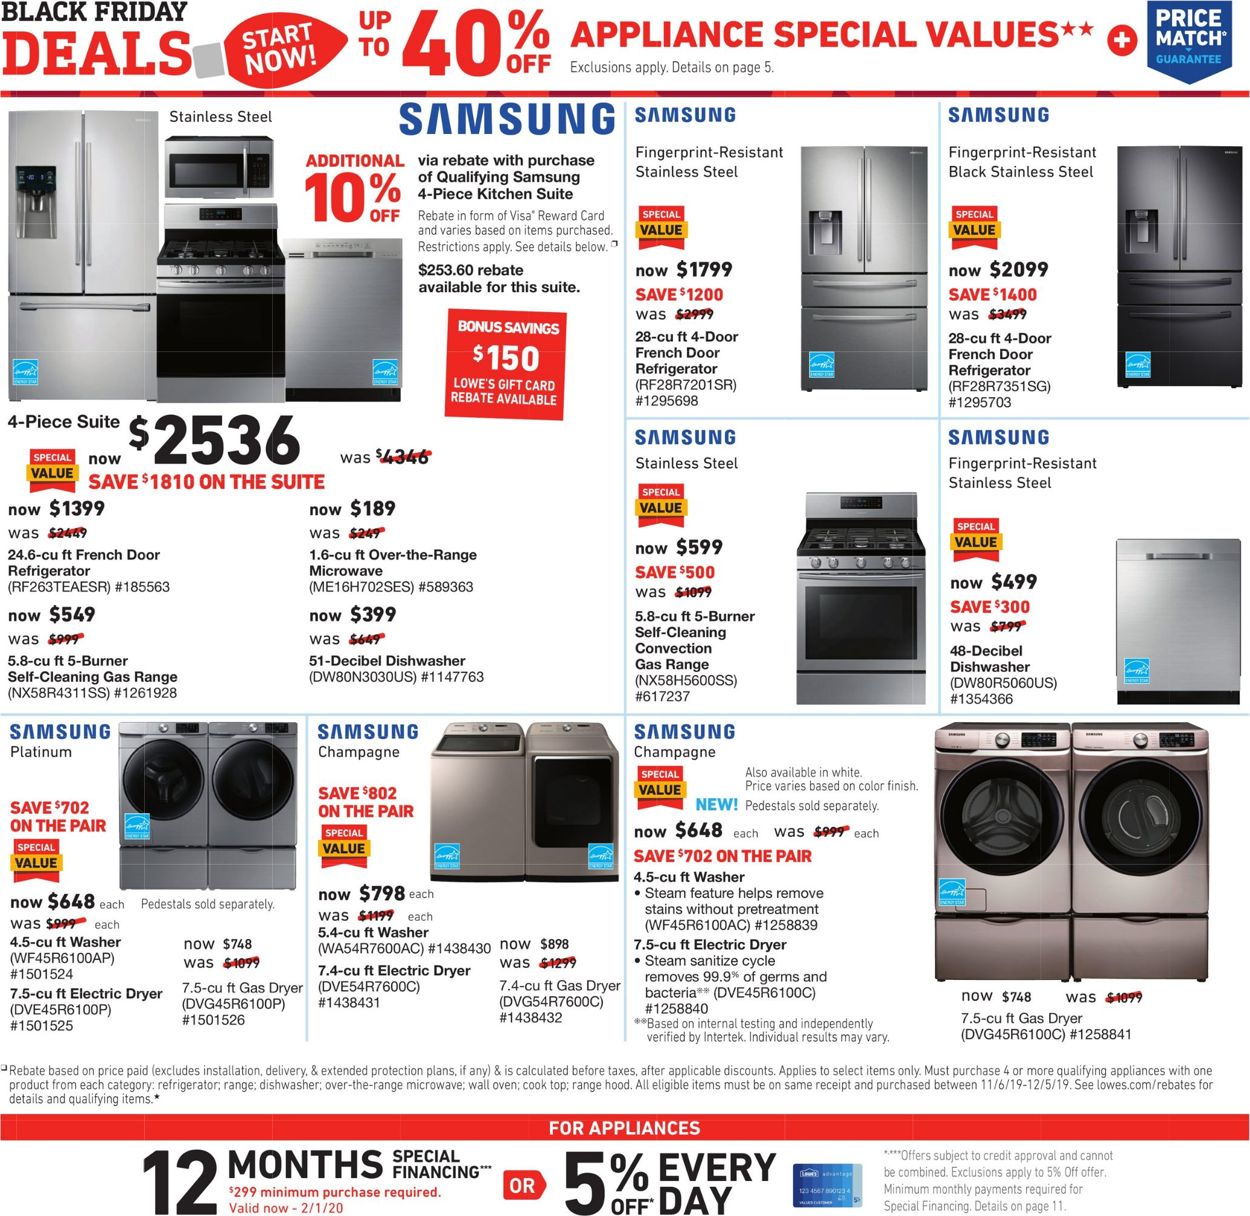 Catalogue Lowe's - Black Friday Ad 2019 from 11/07/2019